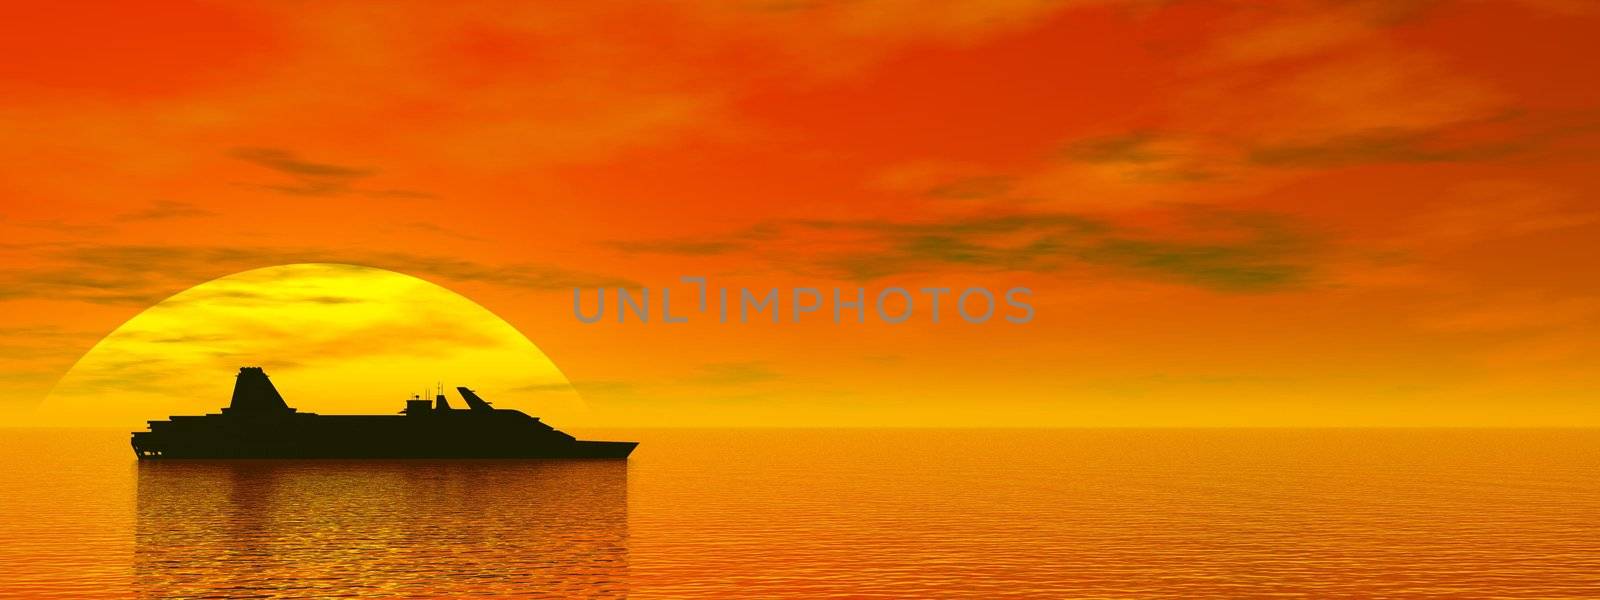 Cruise ship by sunset - 3D render by Elenaphotos21